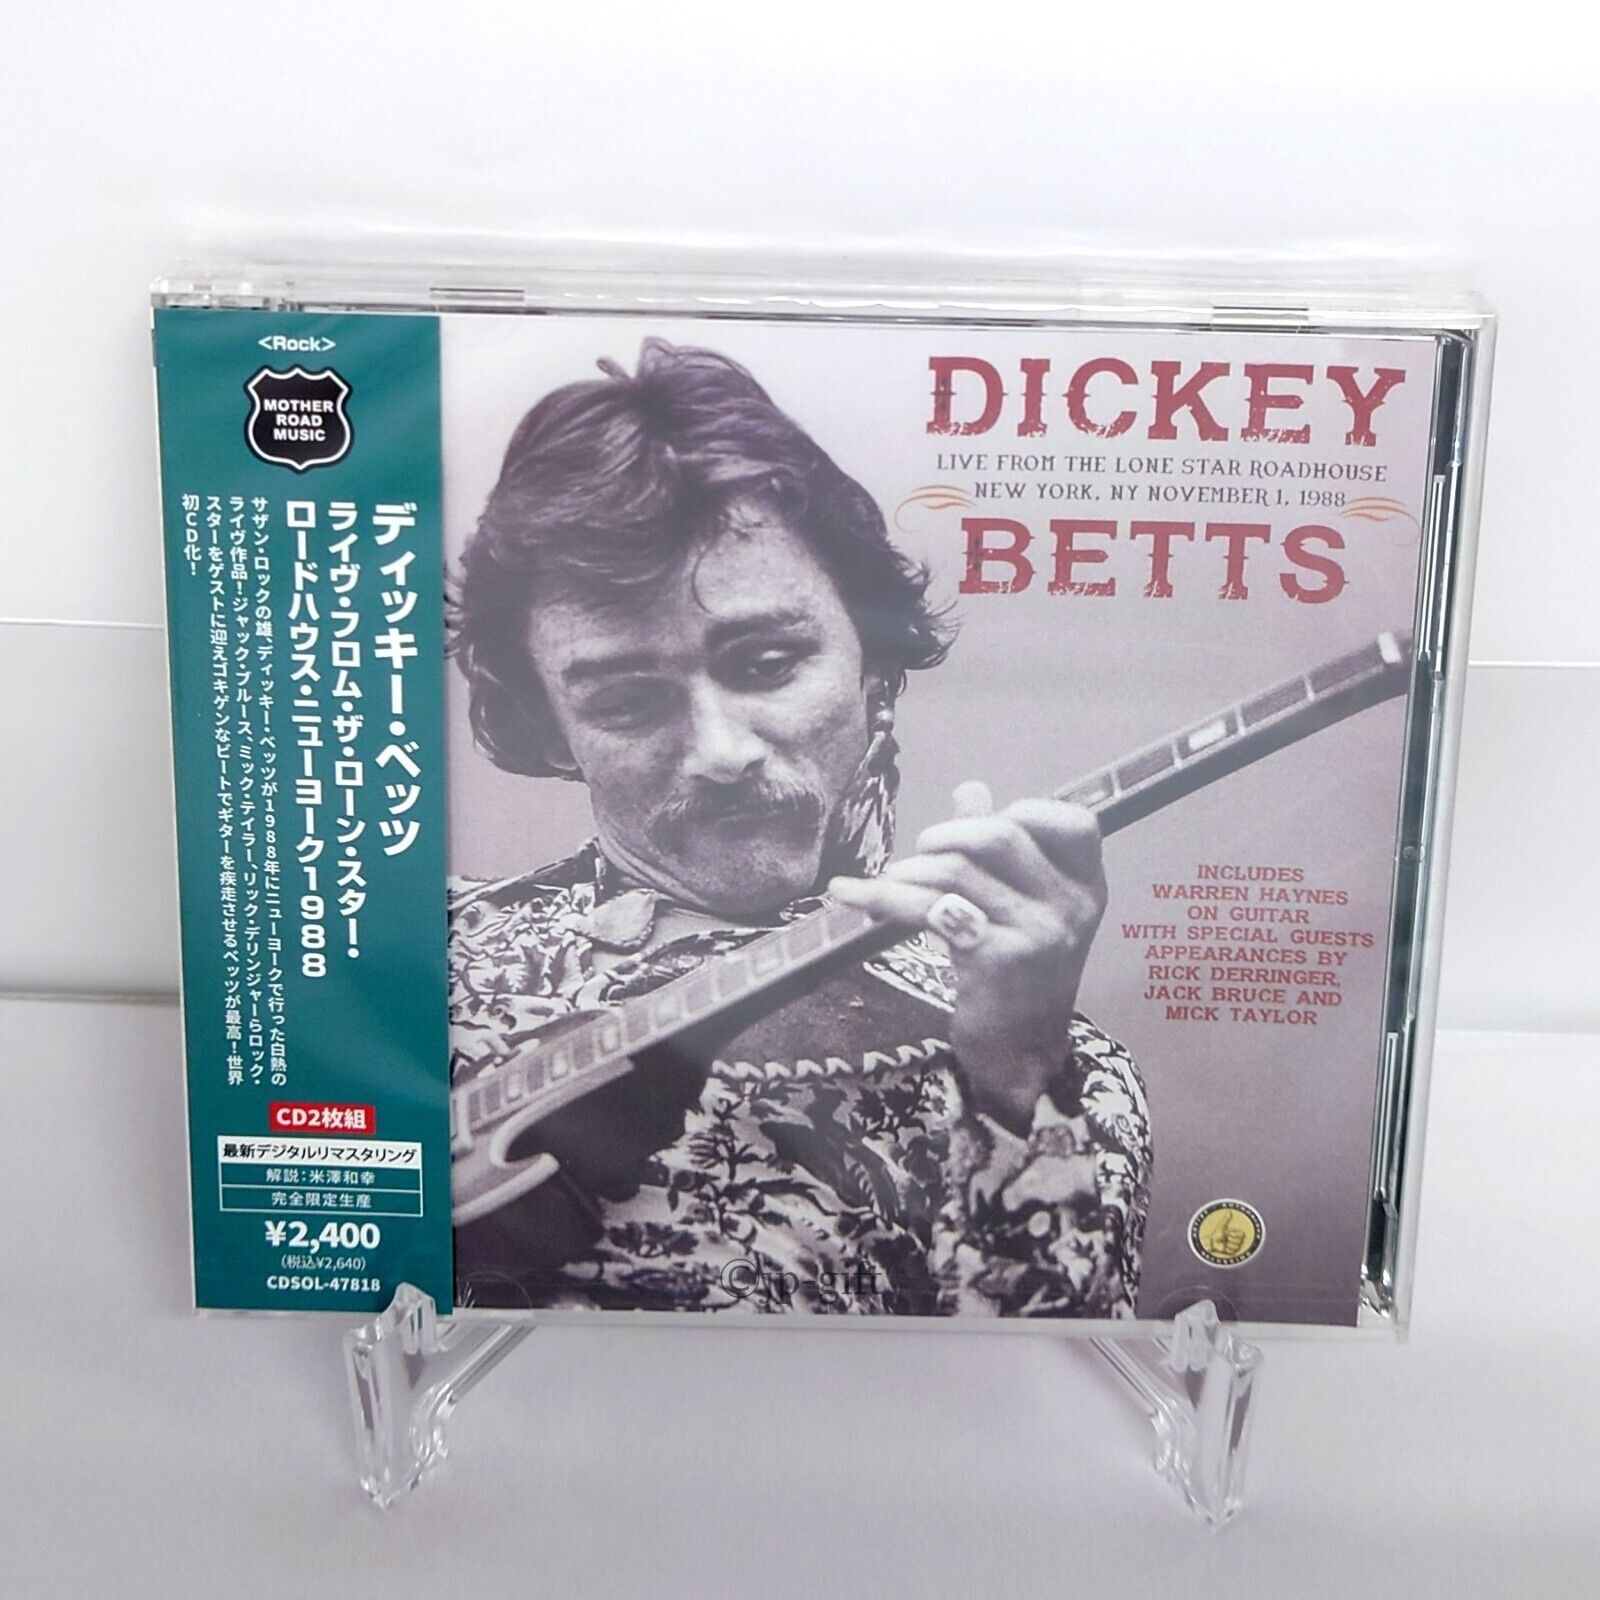 Dickey Betts Live from the Lone Star Roadhouse New York 1988 (2 CDs) Japan Music